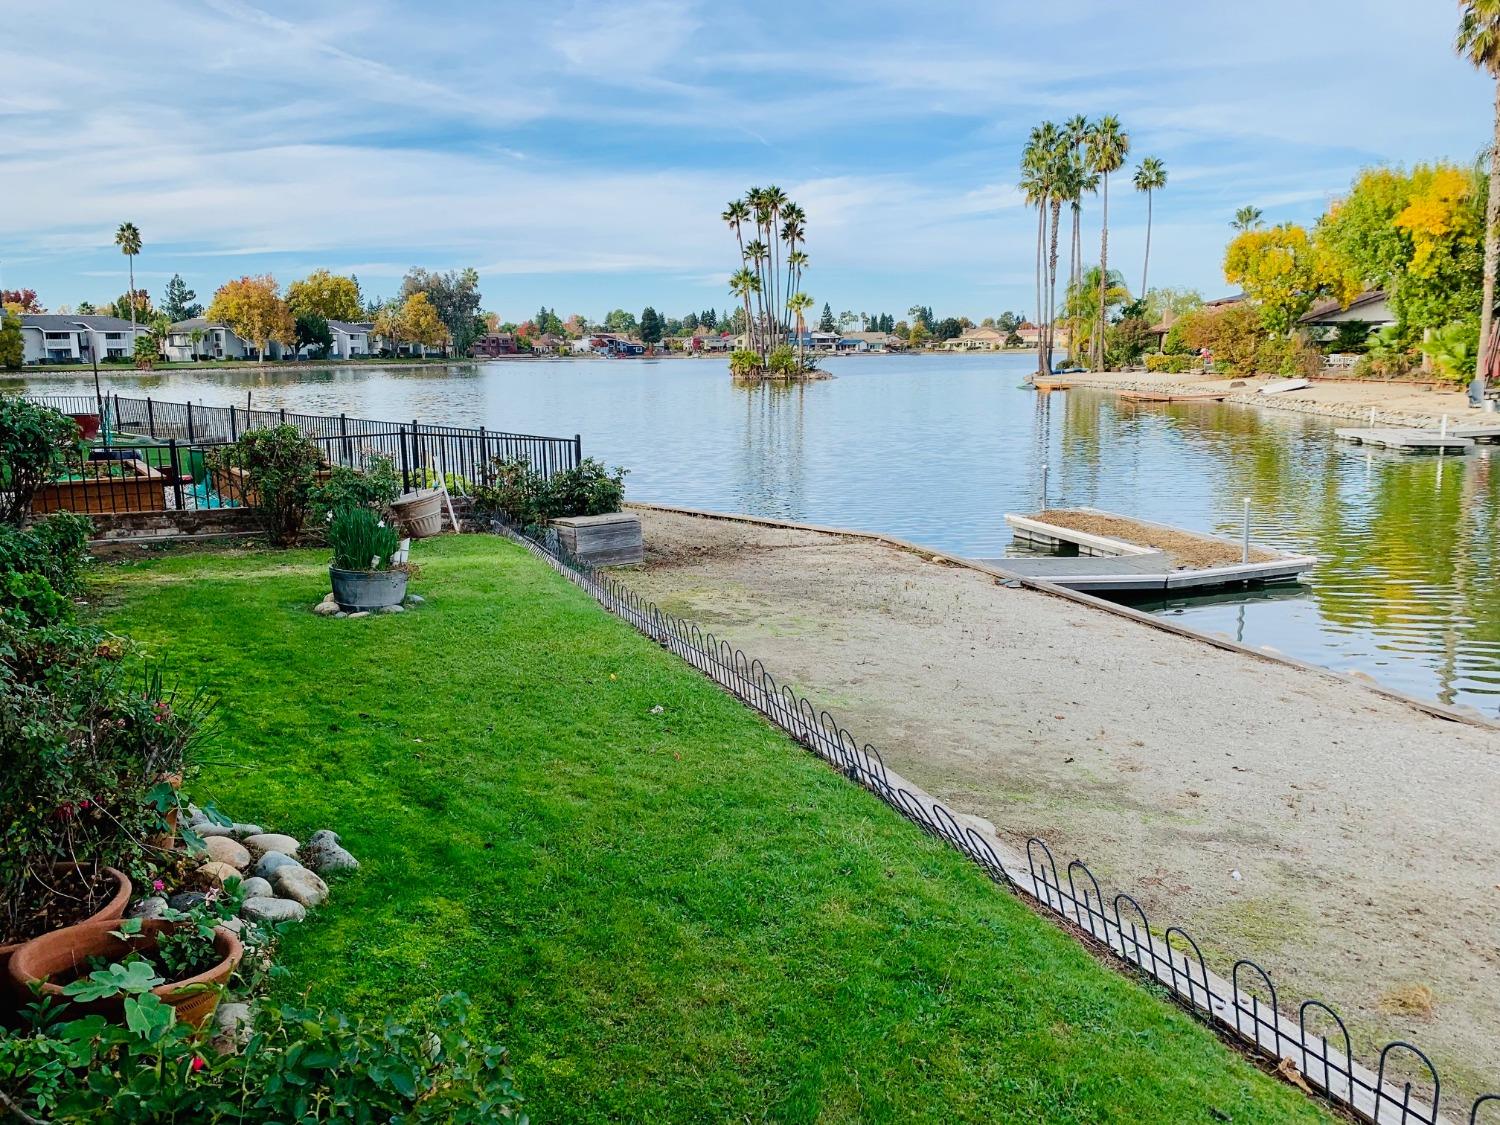 Great Opportunity to own a lakefront home. This modernly updated home is situated on Greenhaven Lake